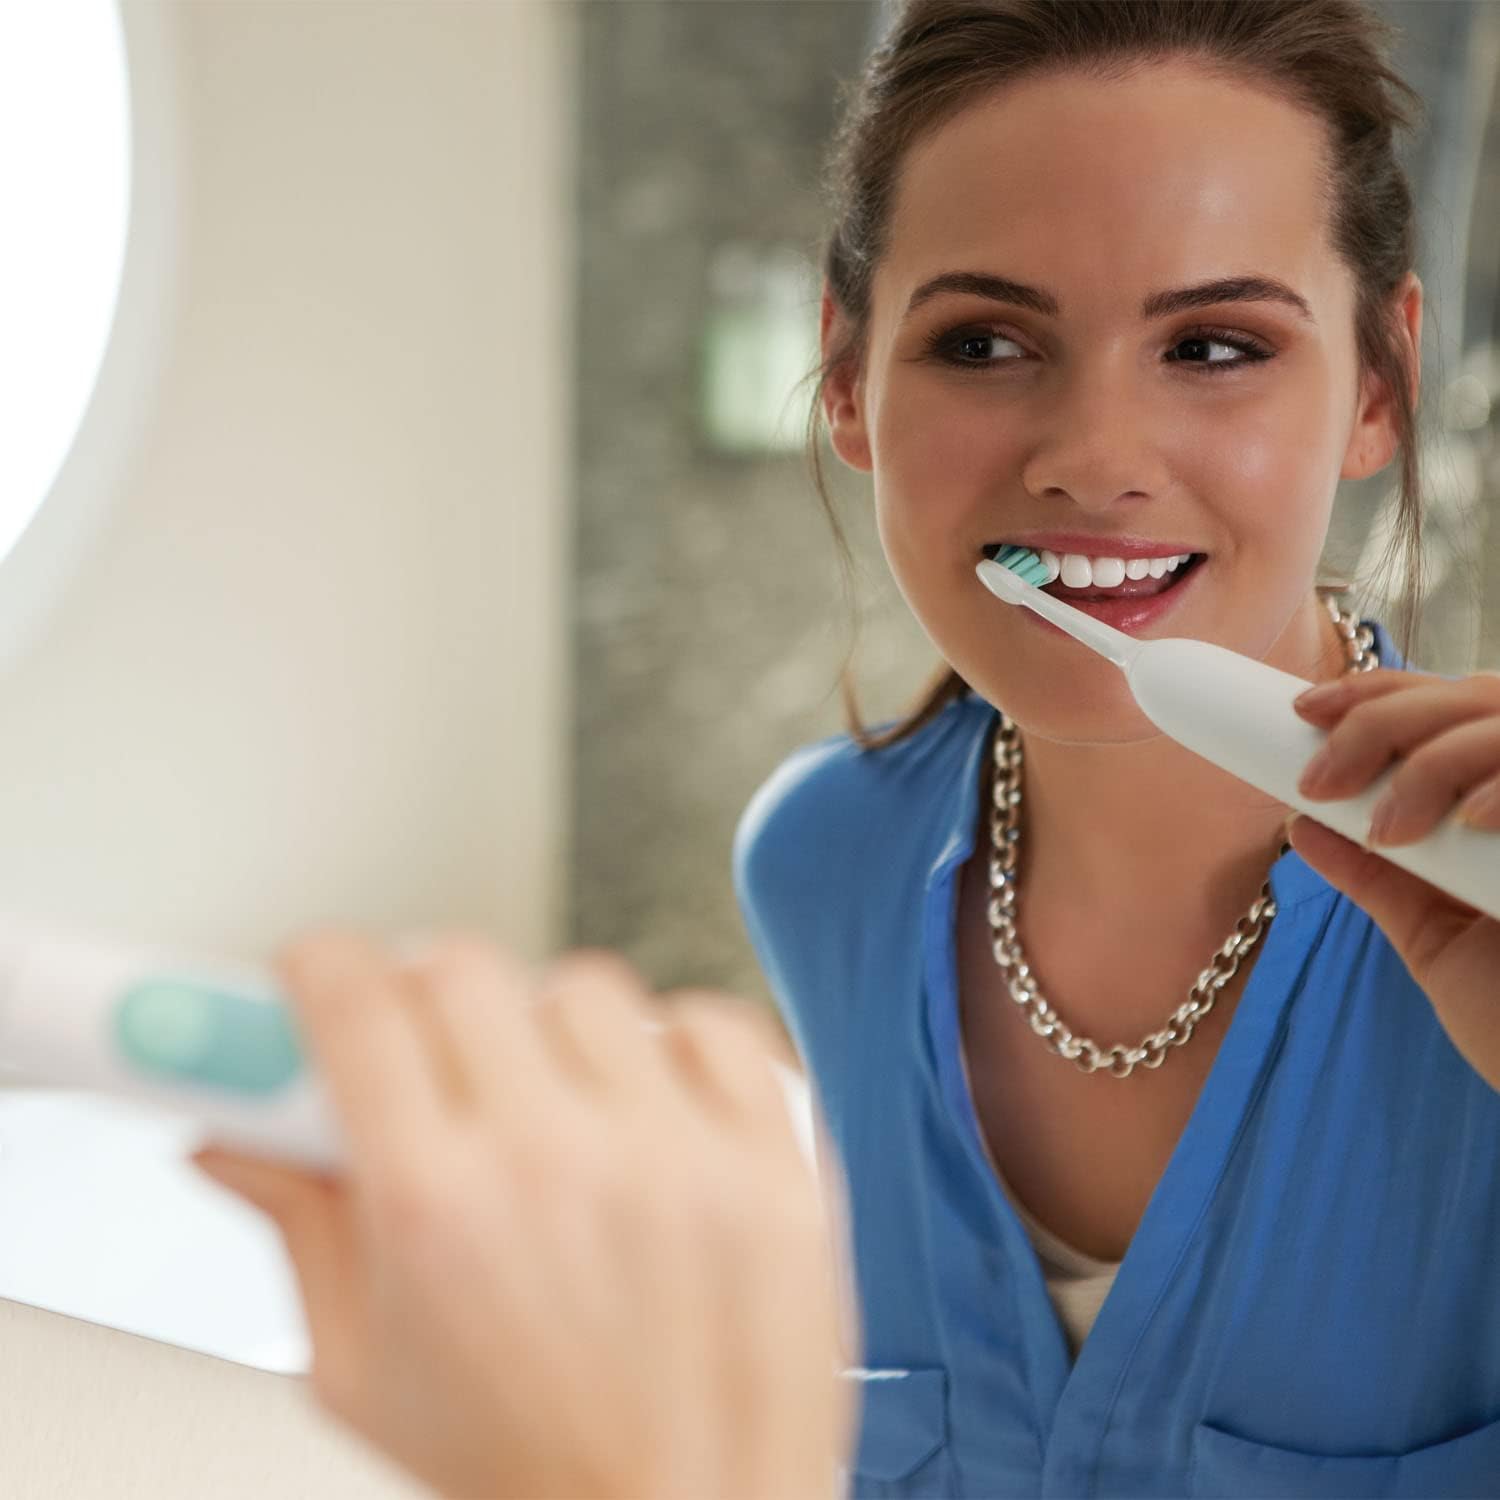 Philips Sonicare DailyClean 3100 Electric Toothbrush - Healthxpress.ie